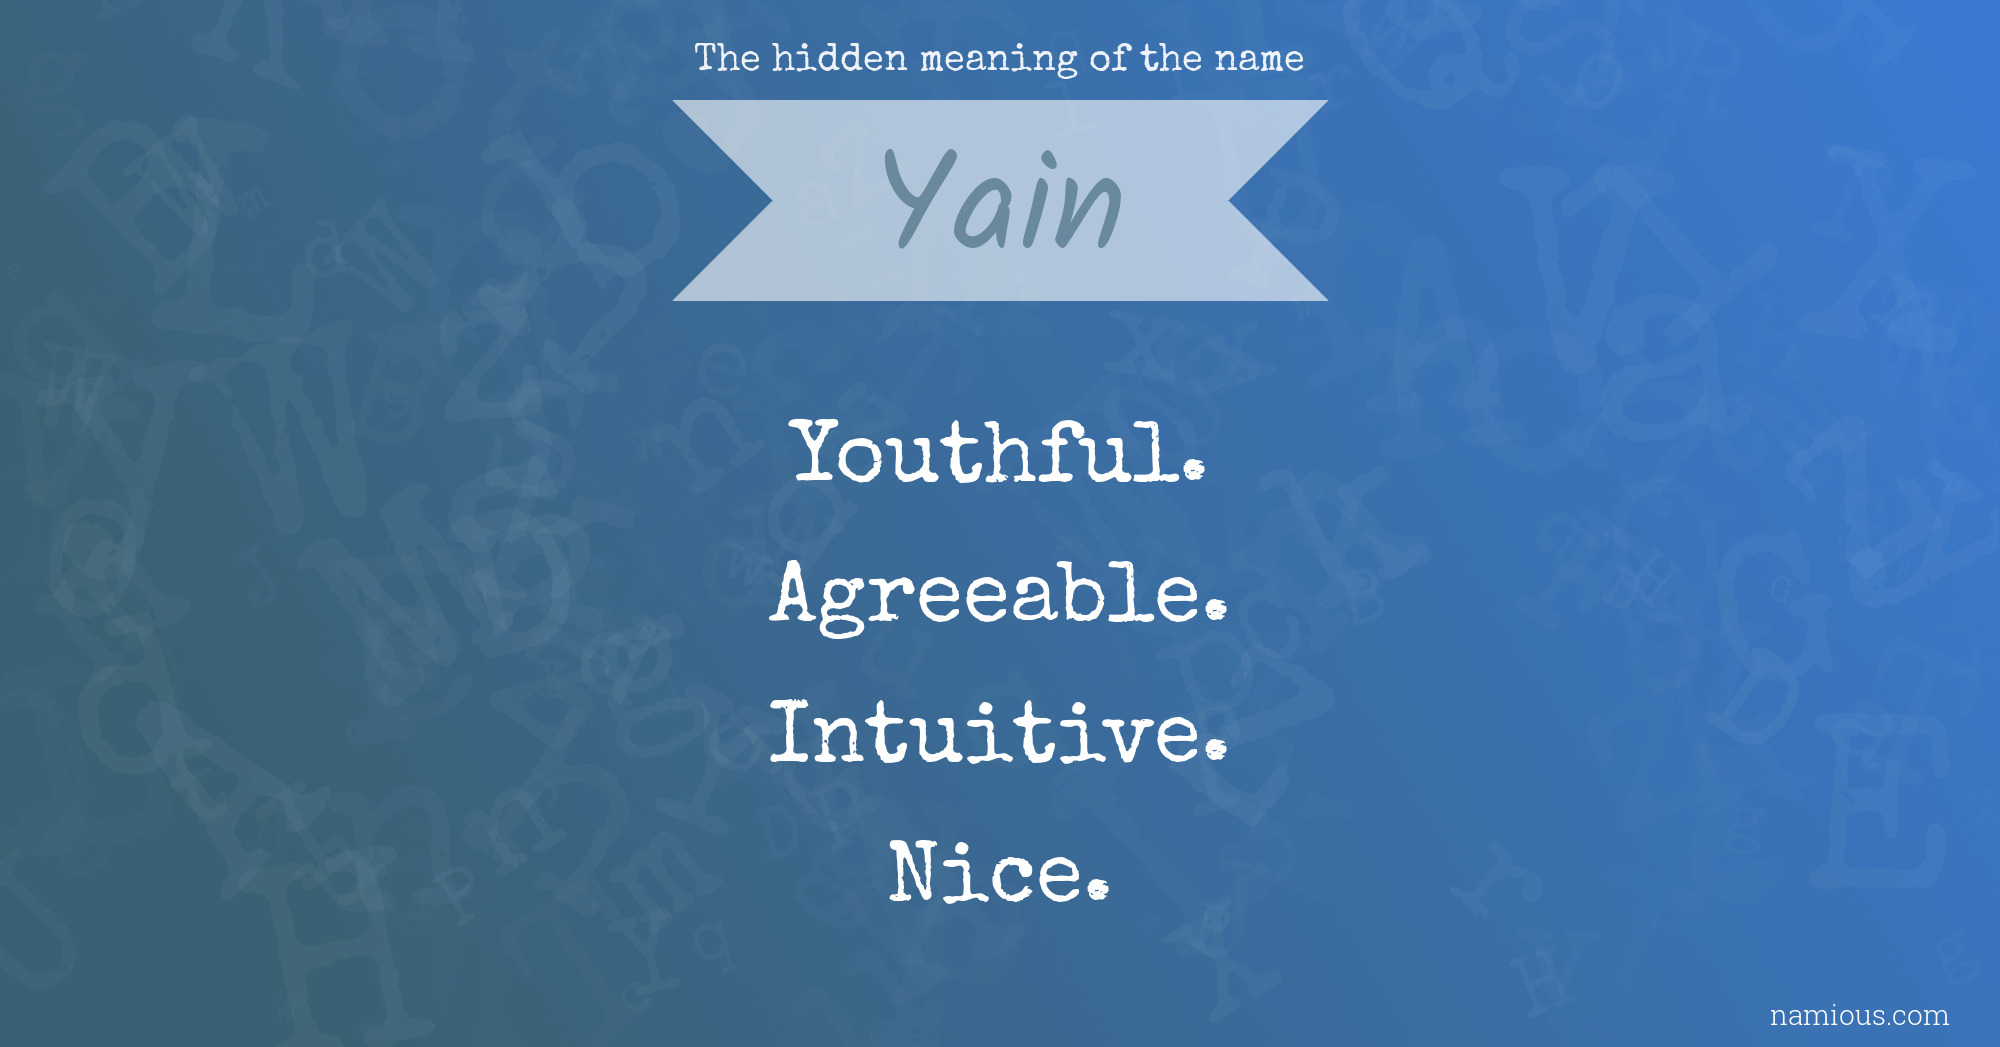 The hidden meaning of the name Yain